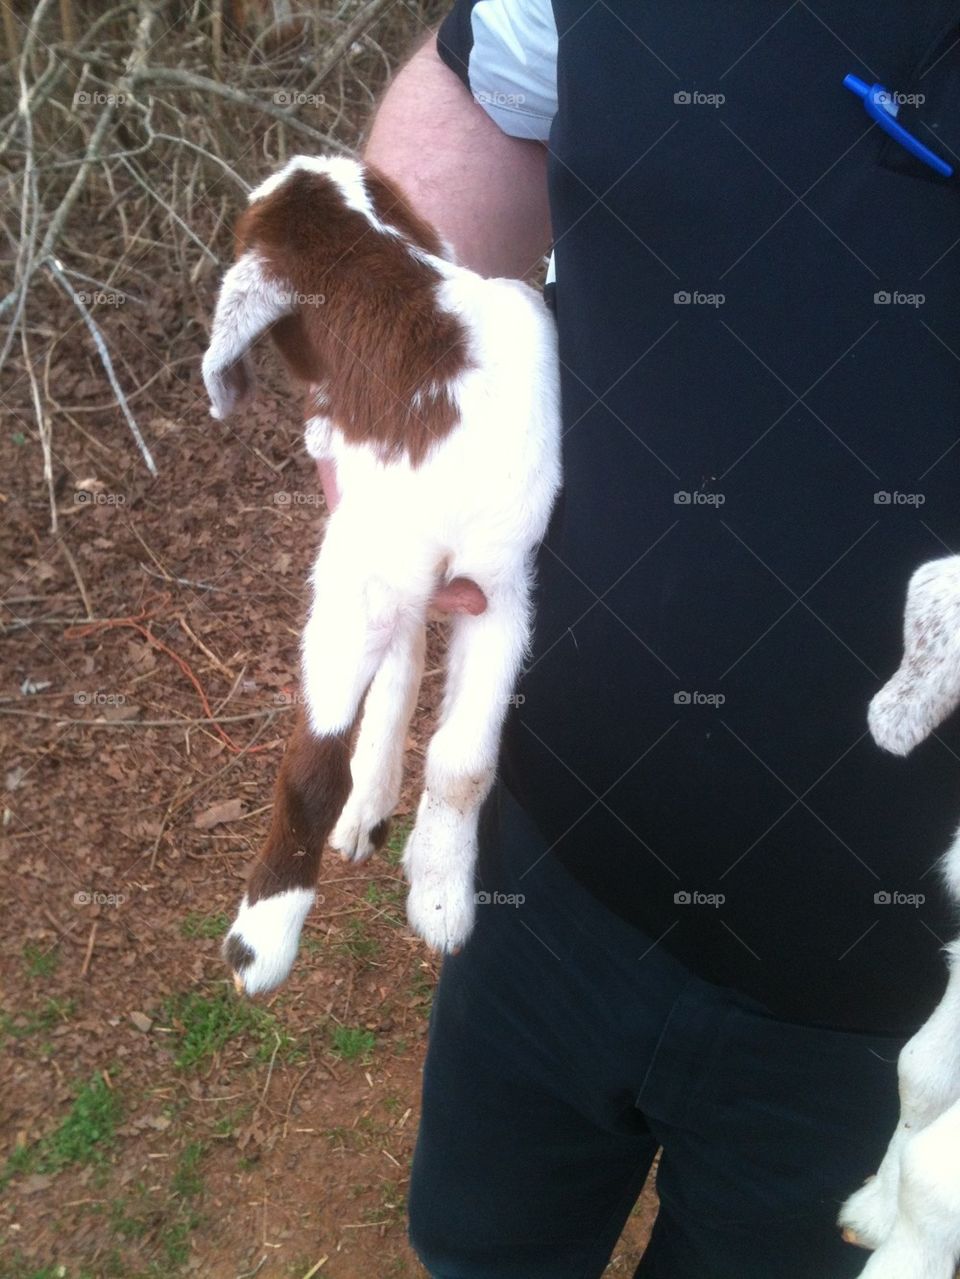 Carrying a Goat Kid